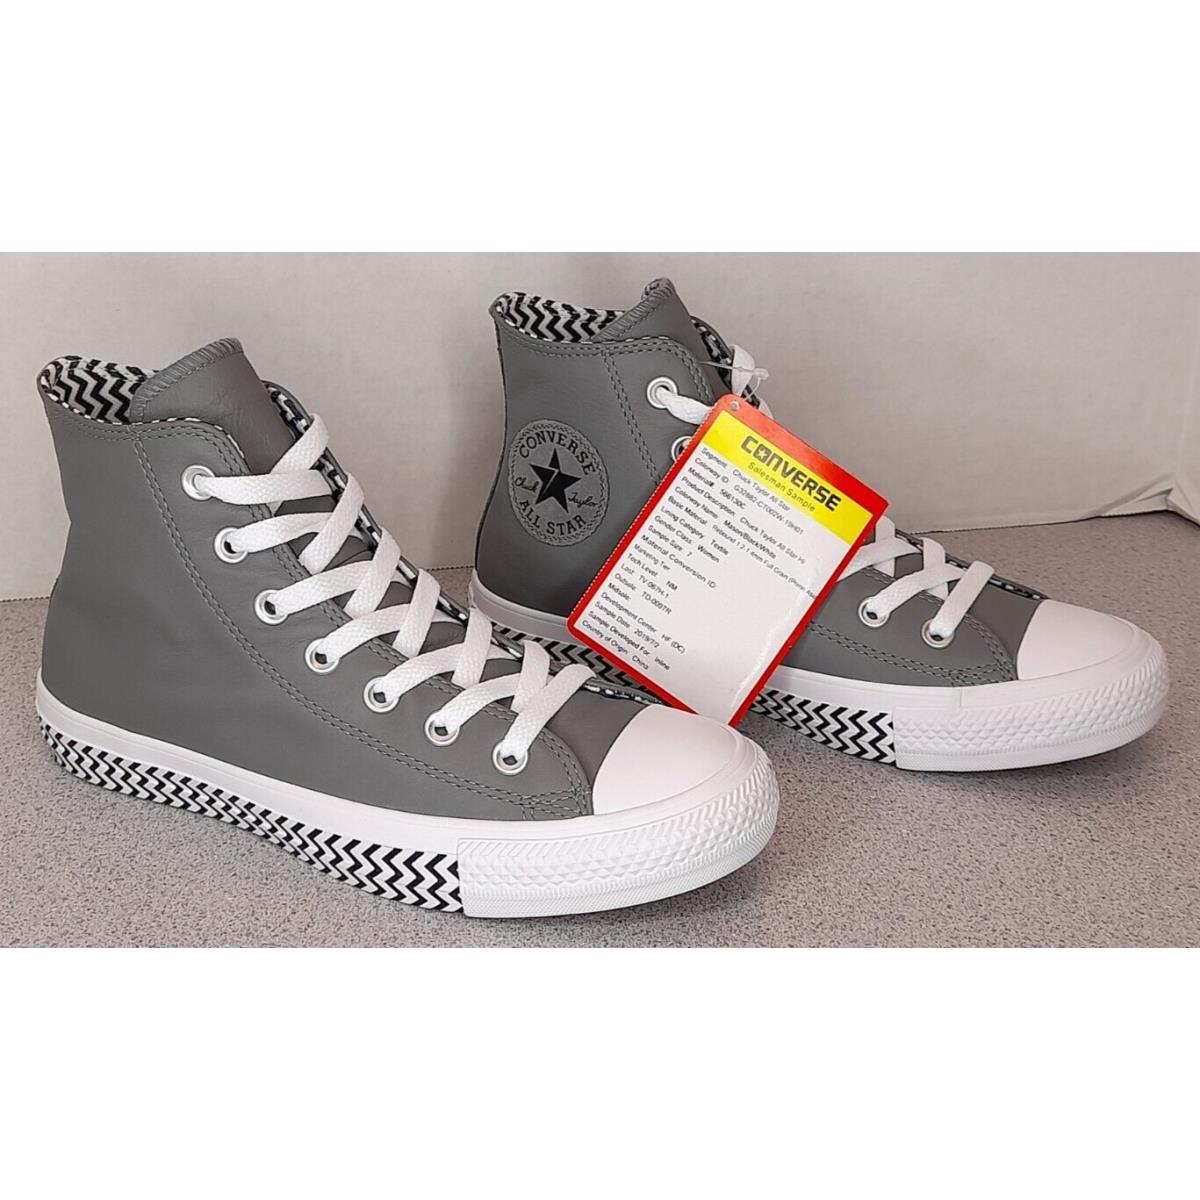 Converse All Star Chuck Taylor Hi Top Leather Sneakers Shoes Salesman Sample